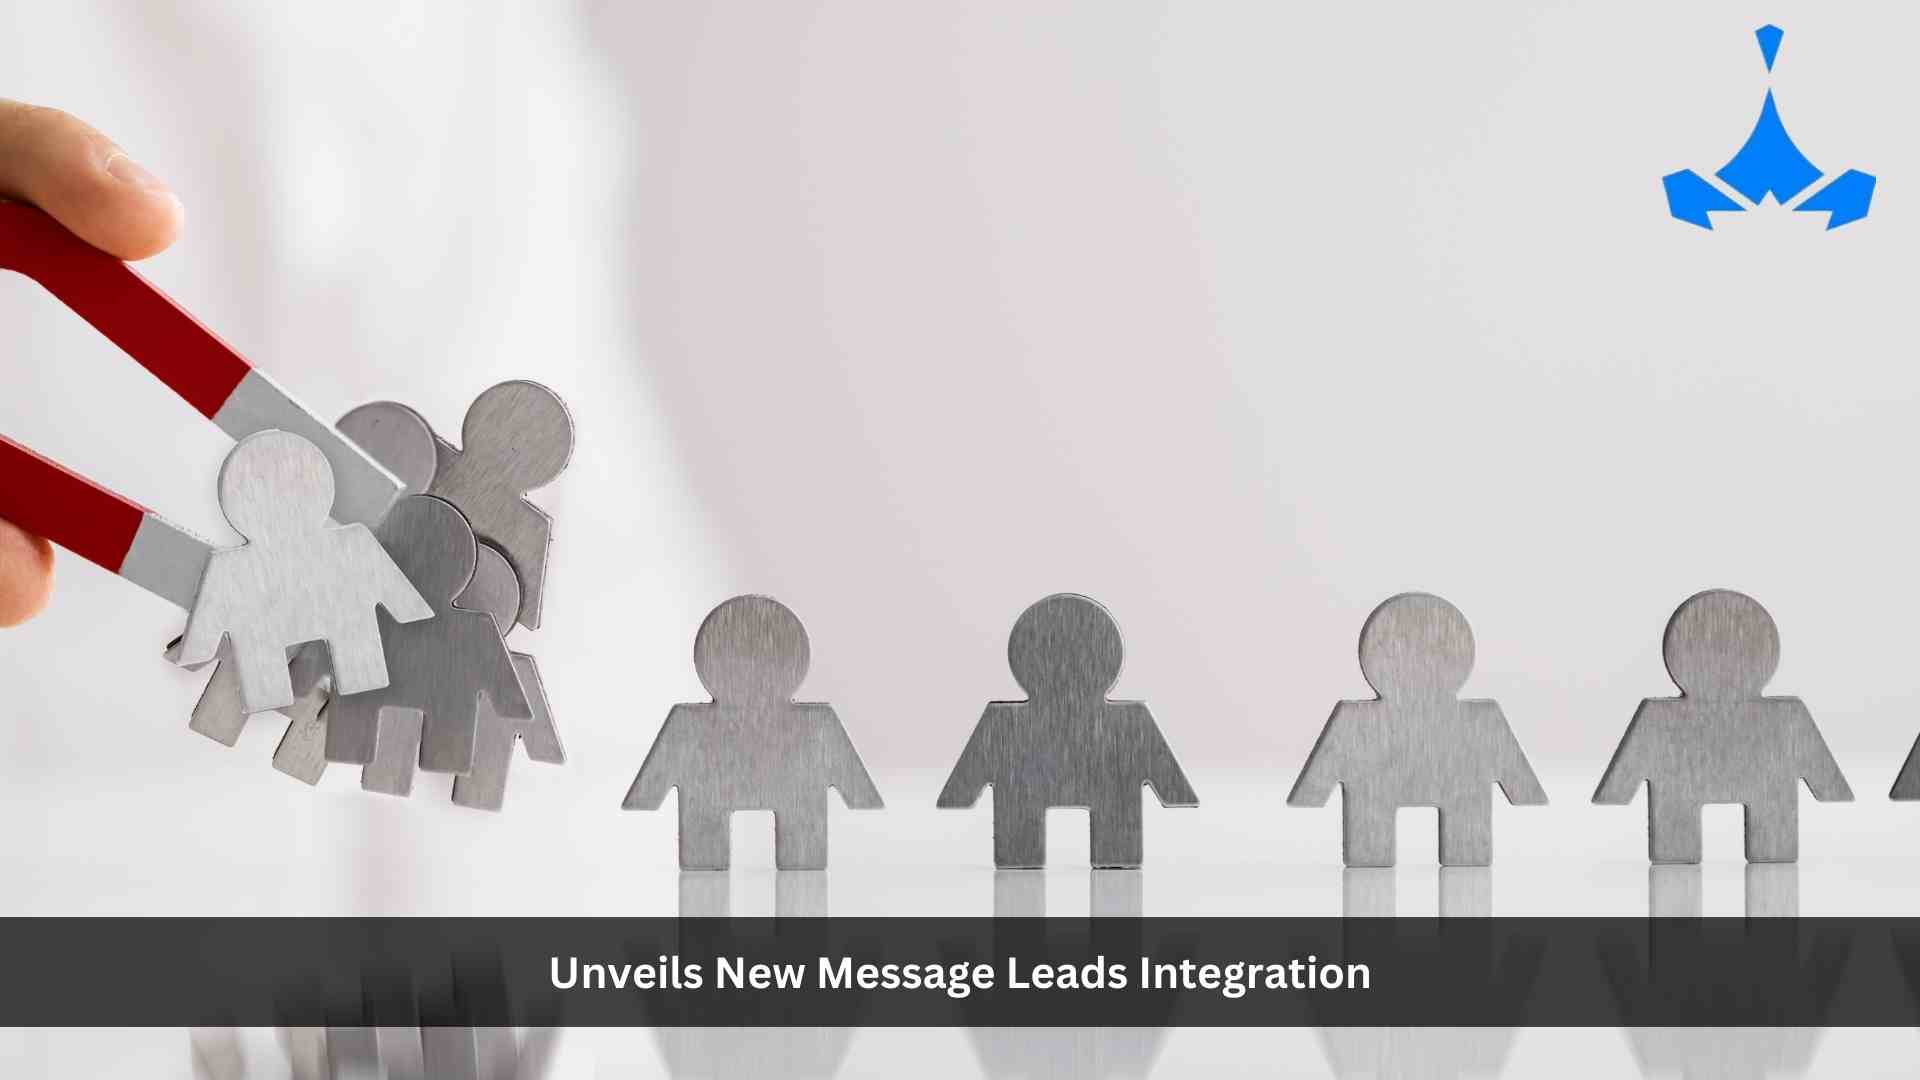 Scorpion Unveils New Message Leads Integration to Enhance Local Services Ads